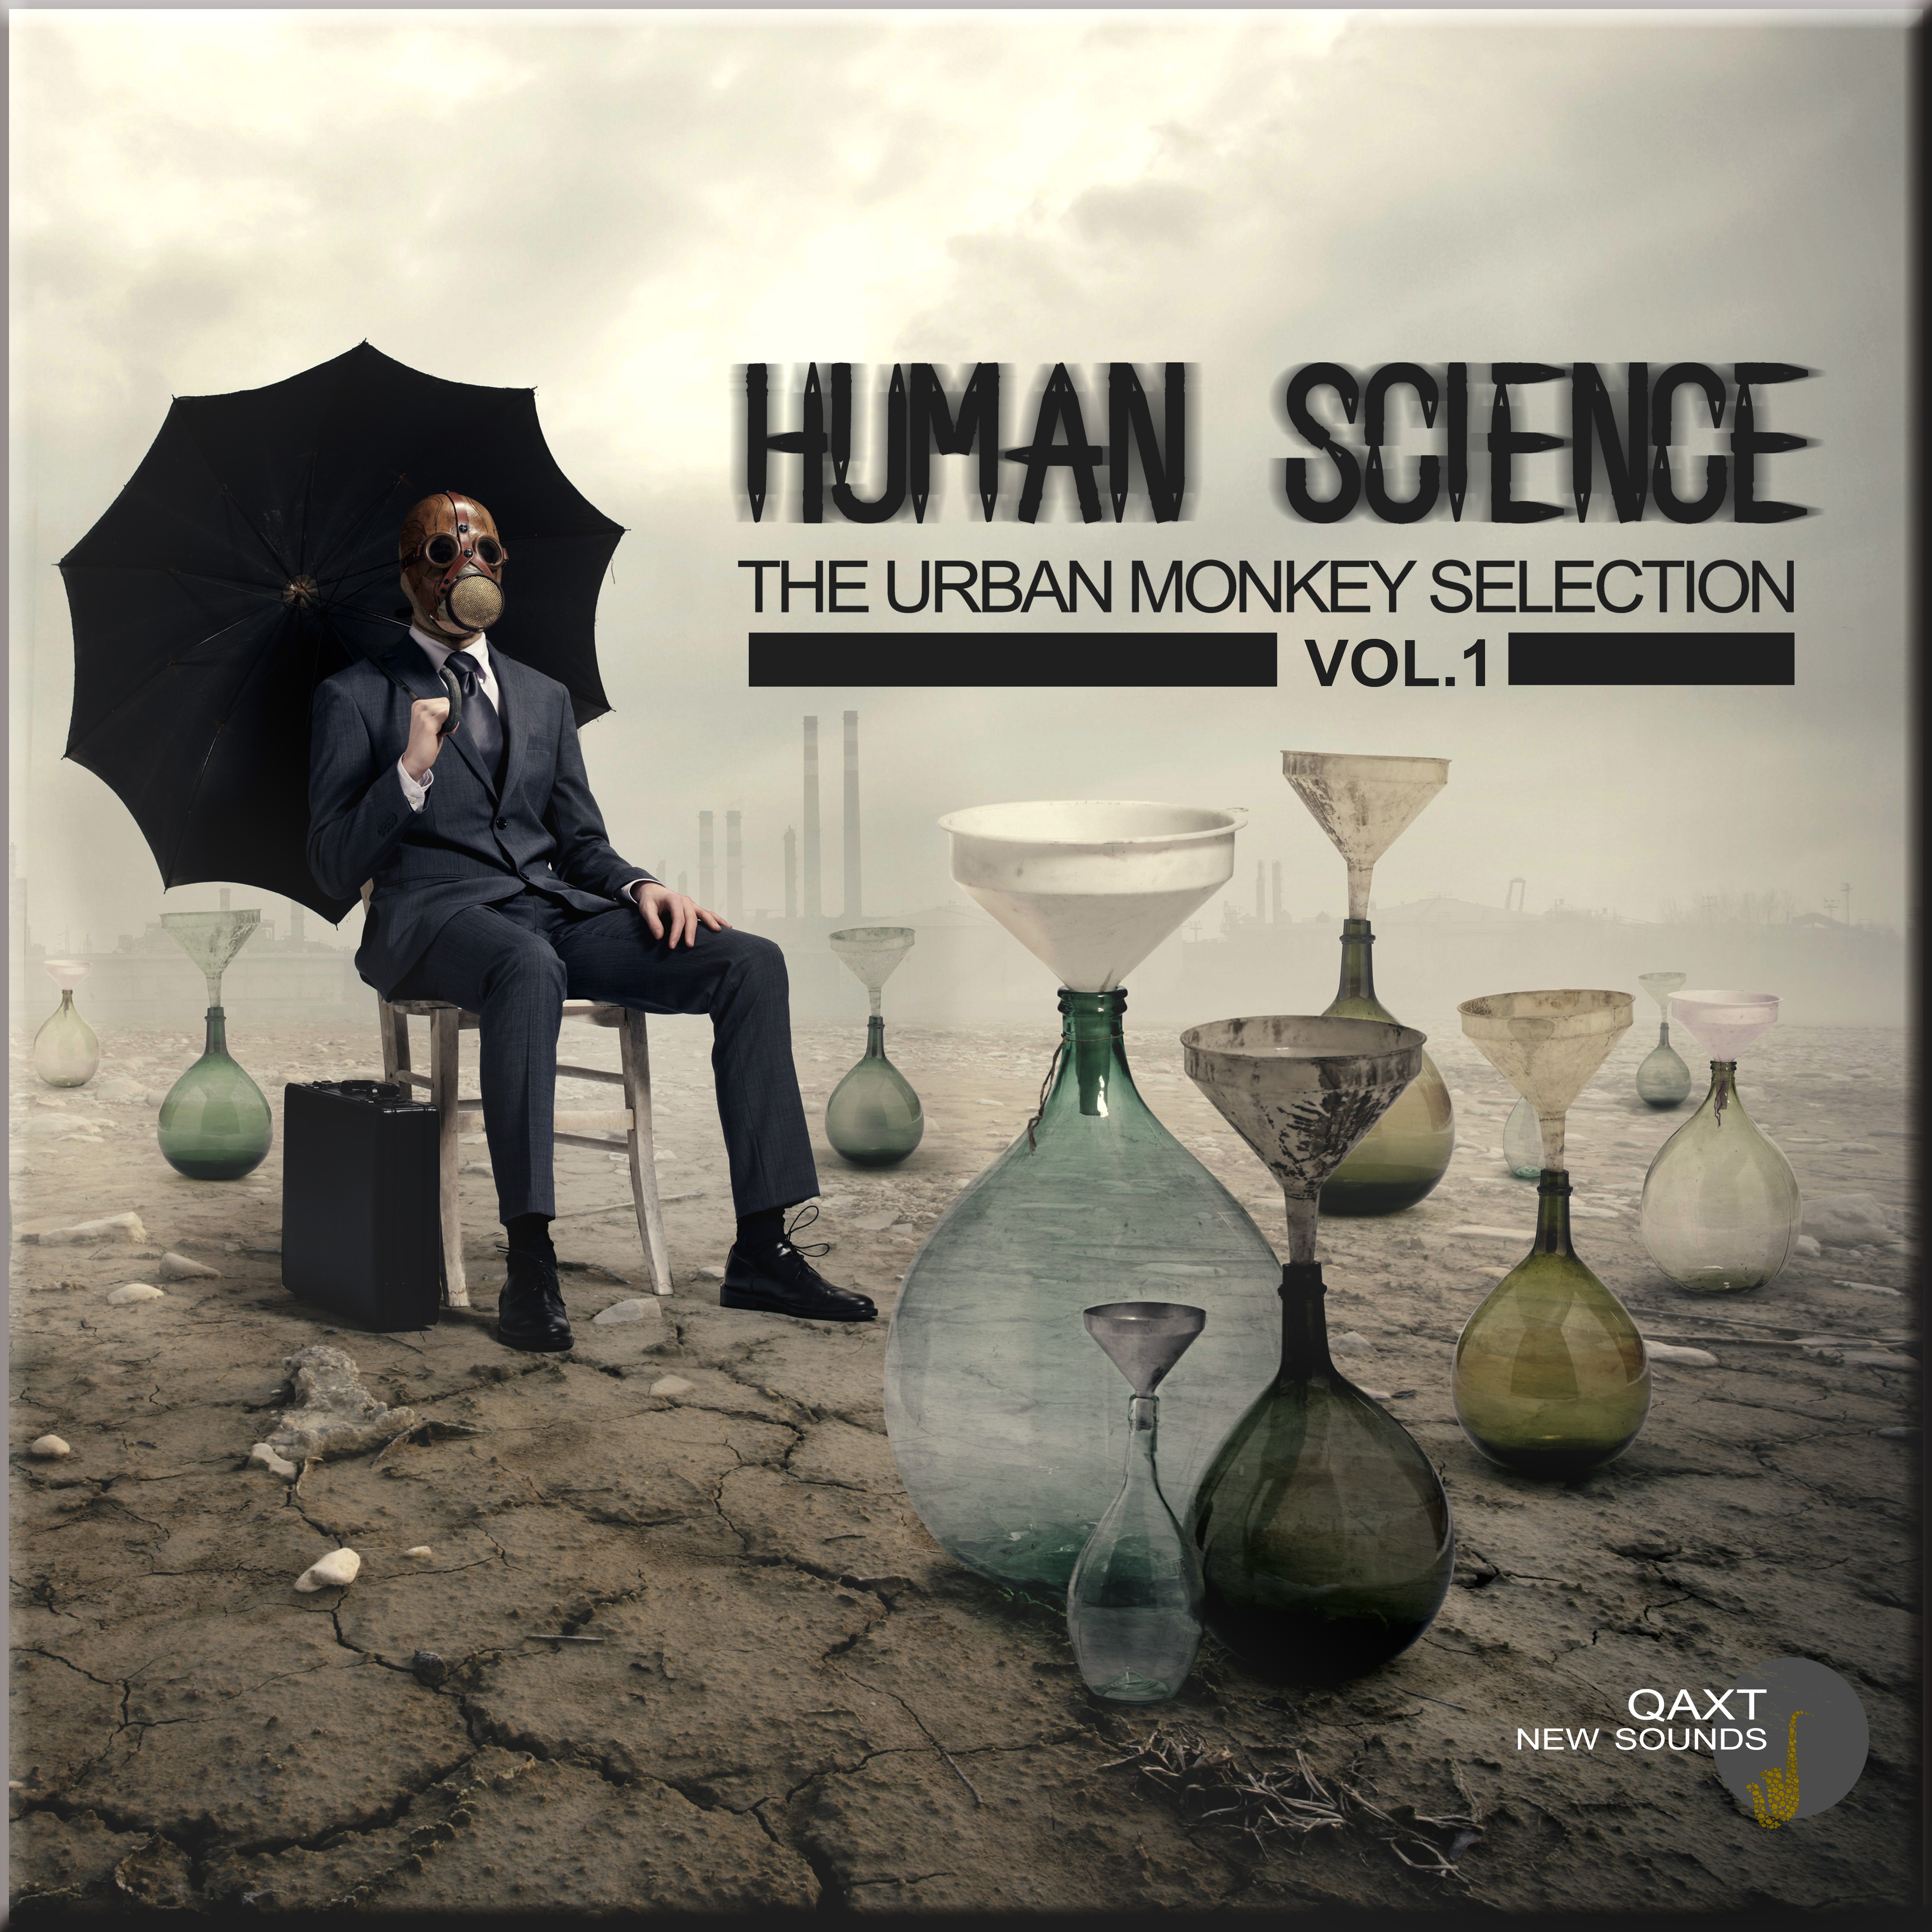 Human Science: The Urban Monkey Selection, Vol. 1 (QAXT New Sounds)